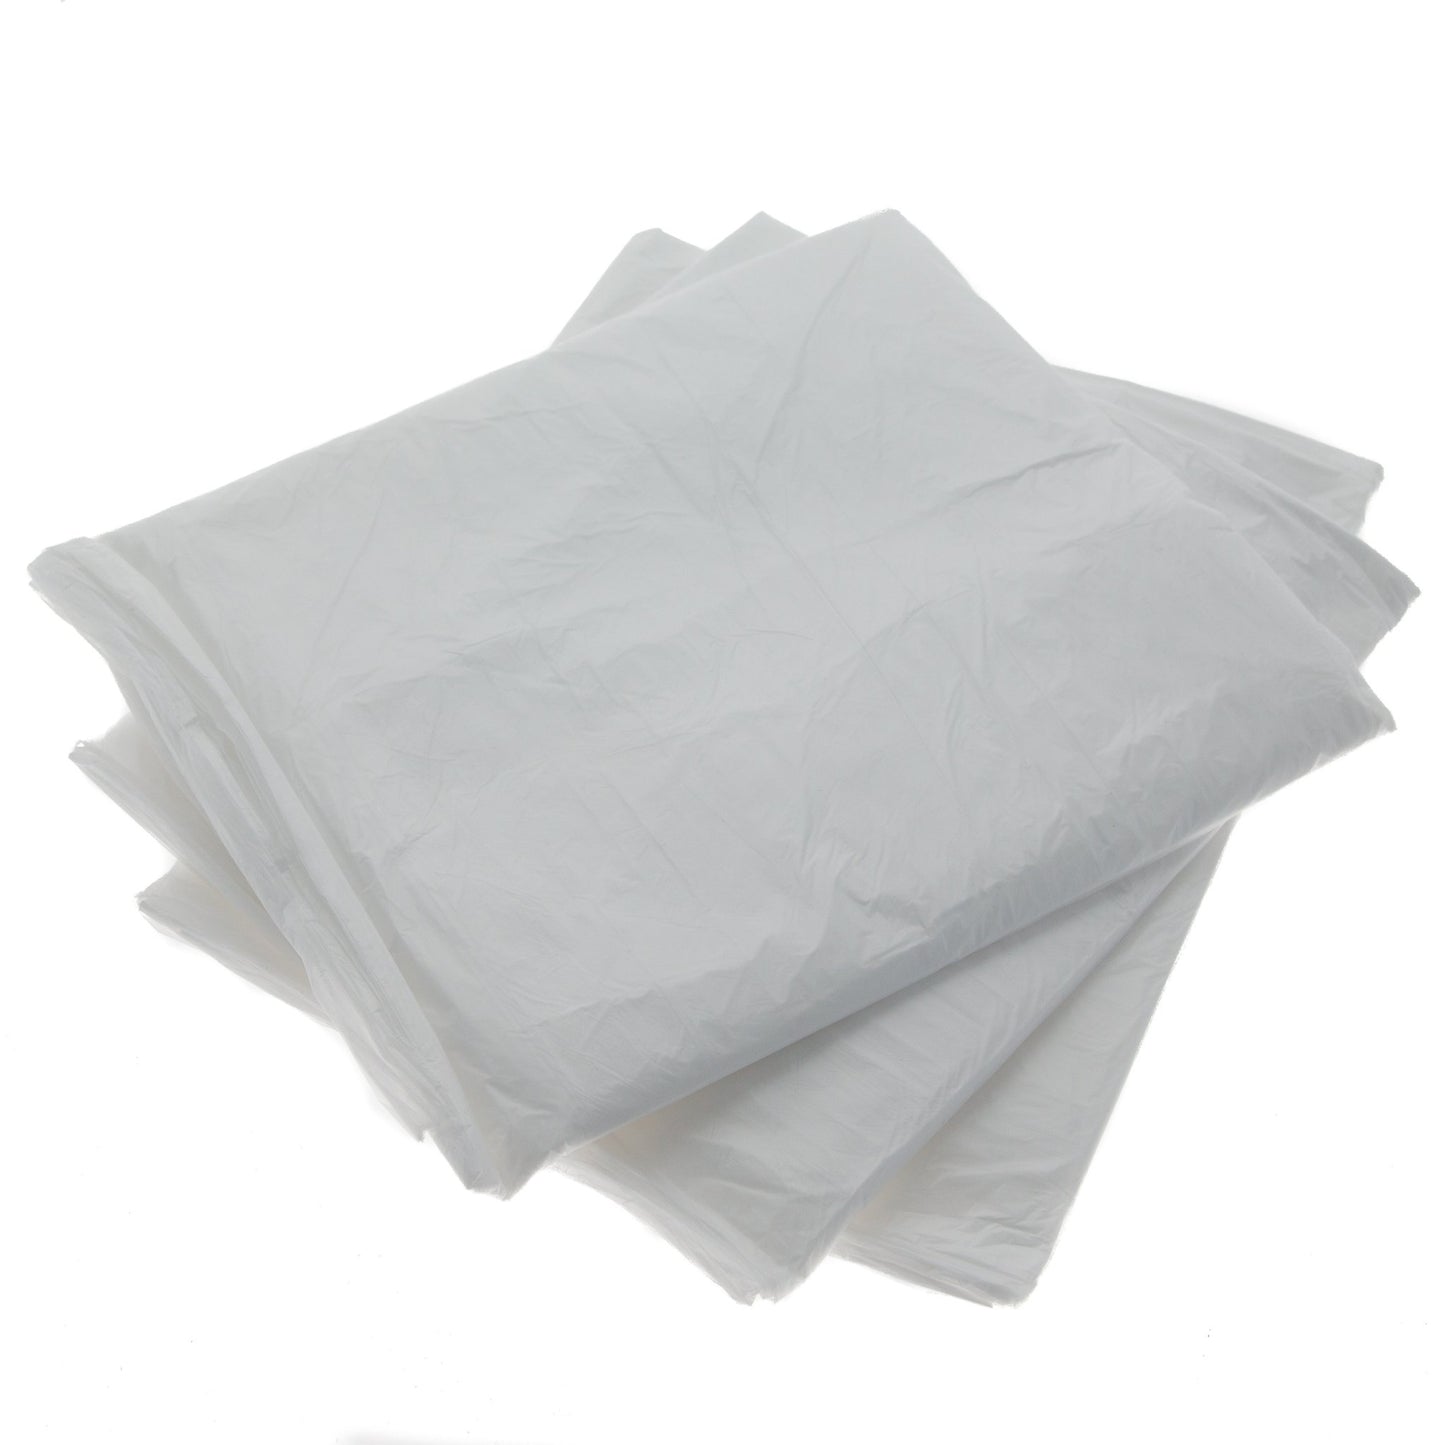 Polythene Dust Sheets, 3 Pack